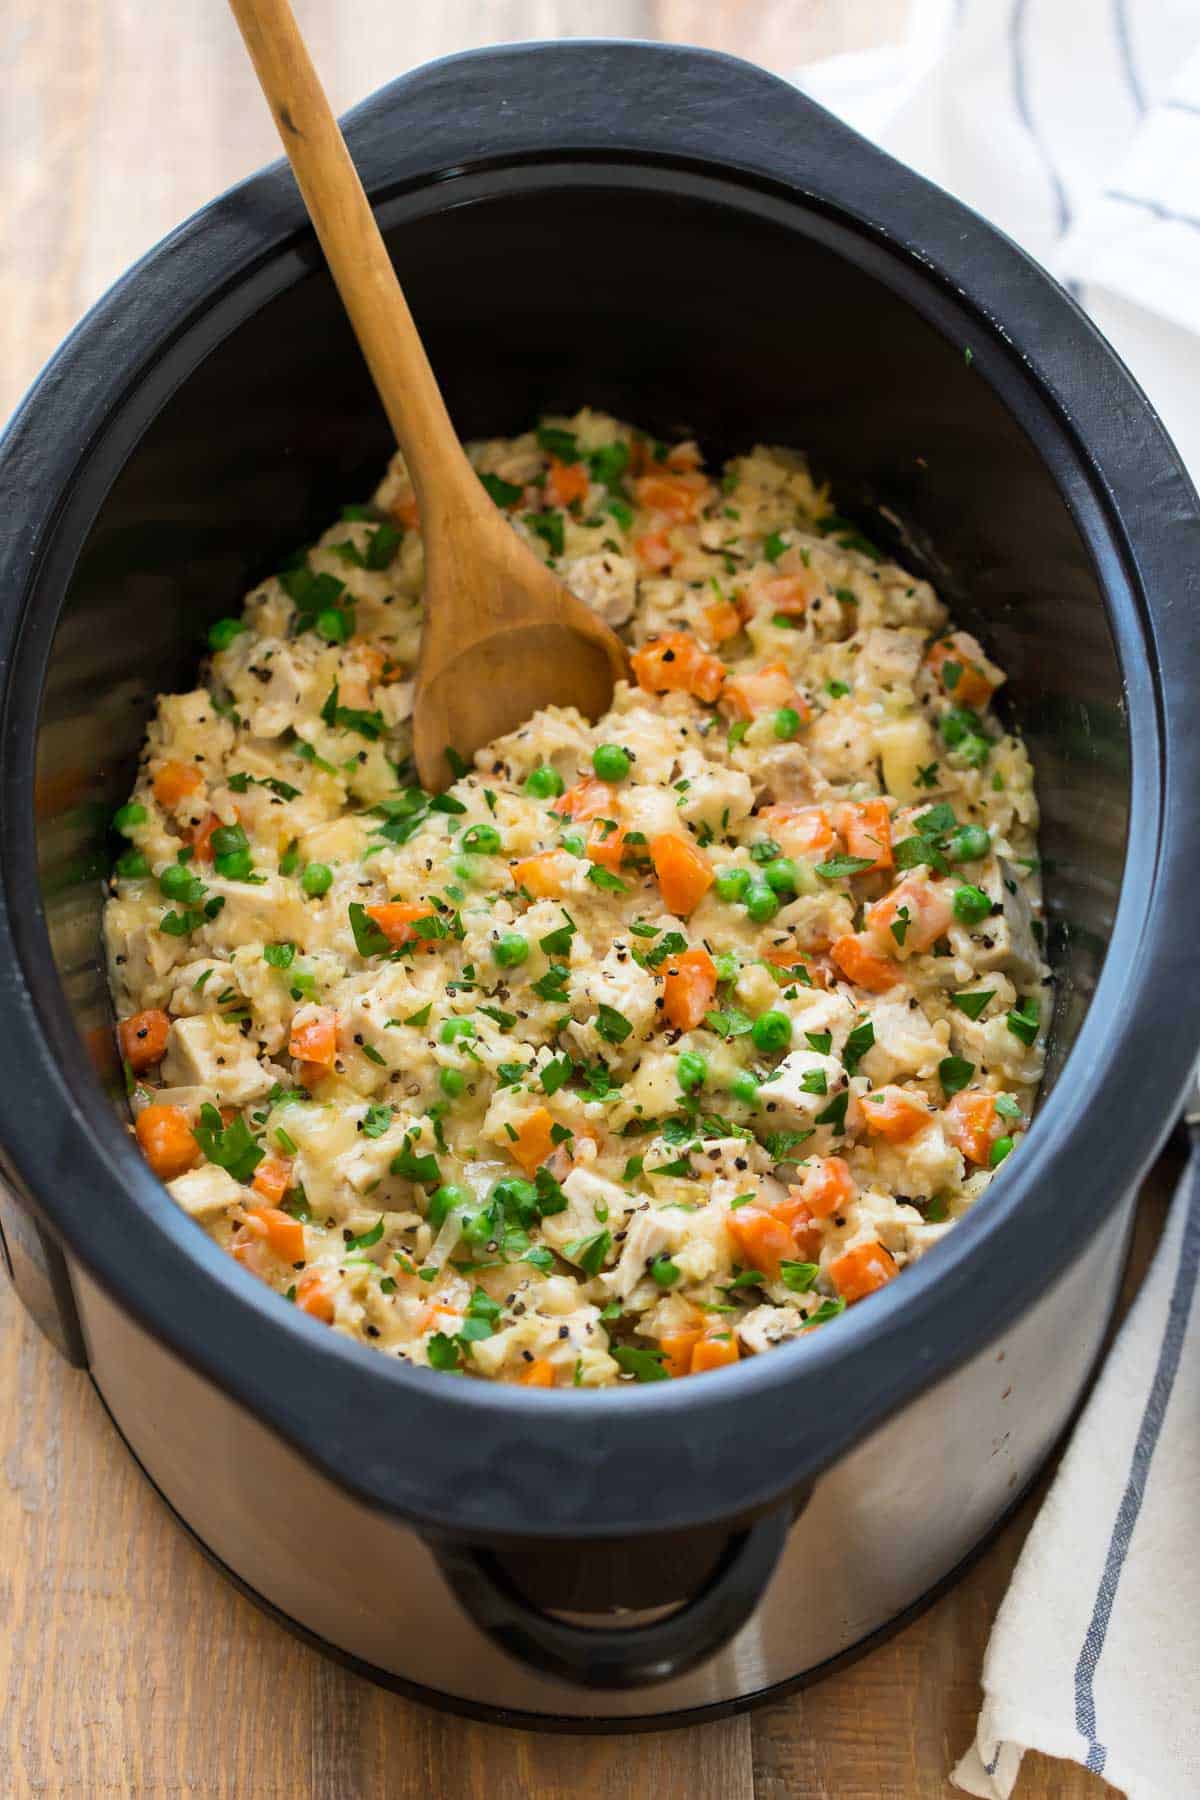 A slow cooker filled with a cheesy casserole